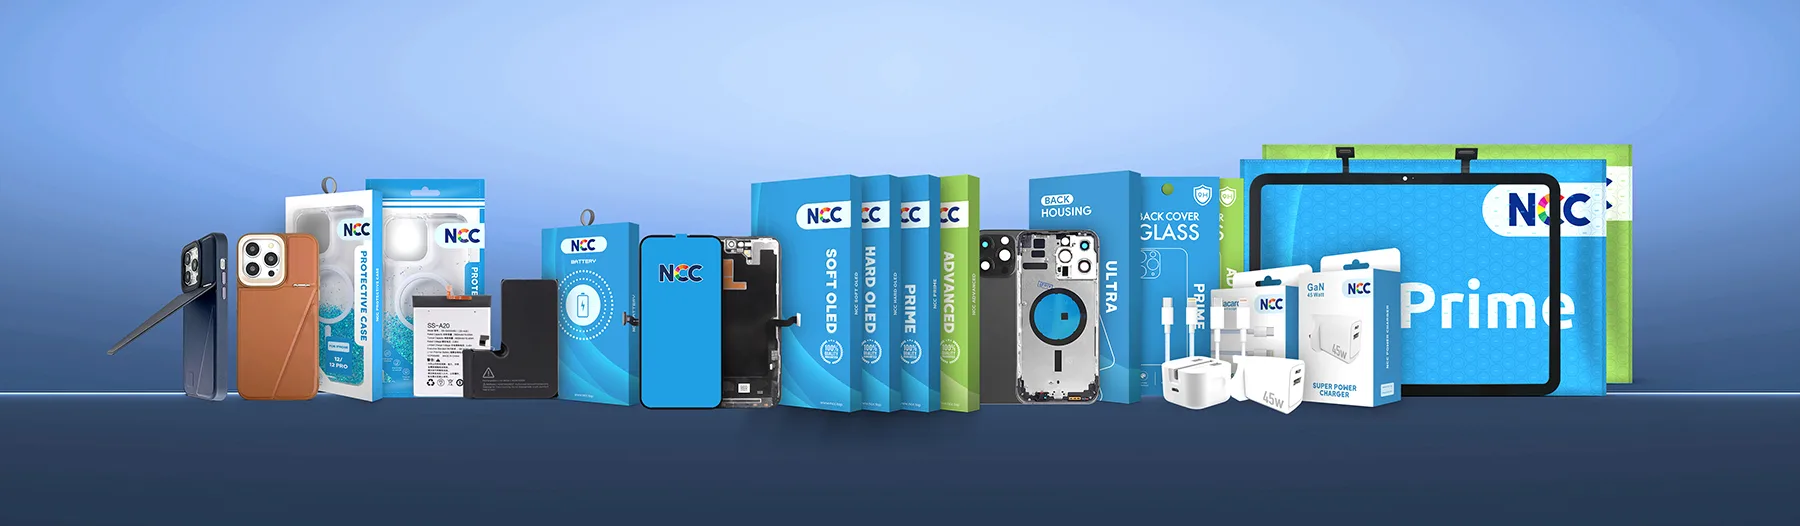 NCC products and packages